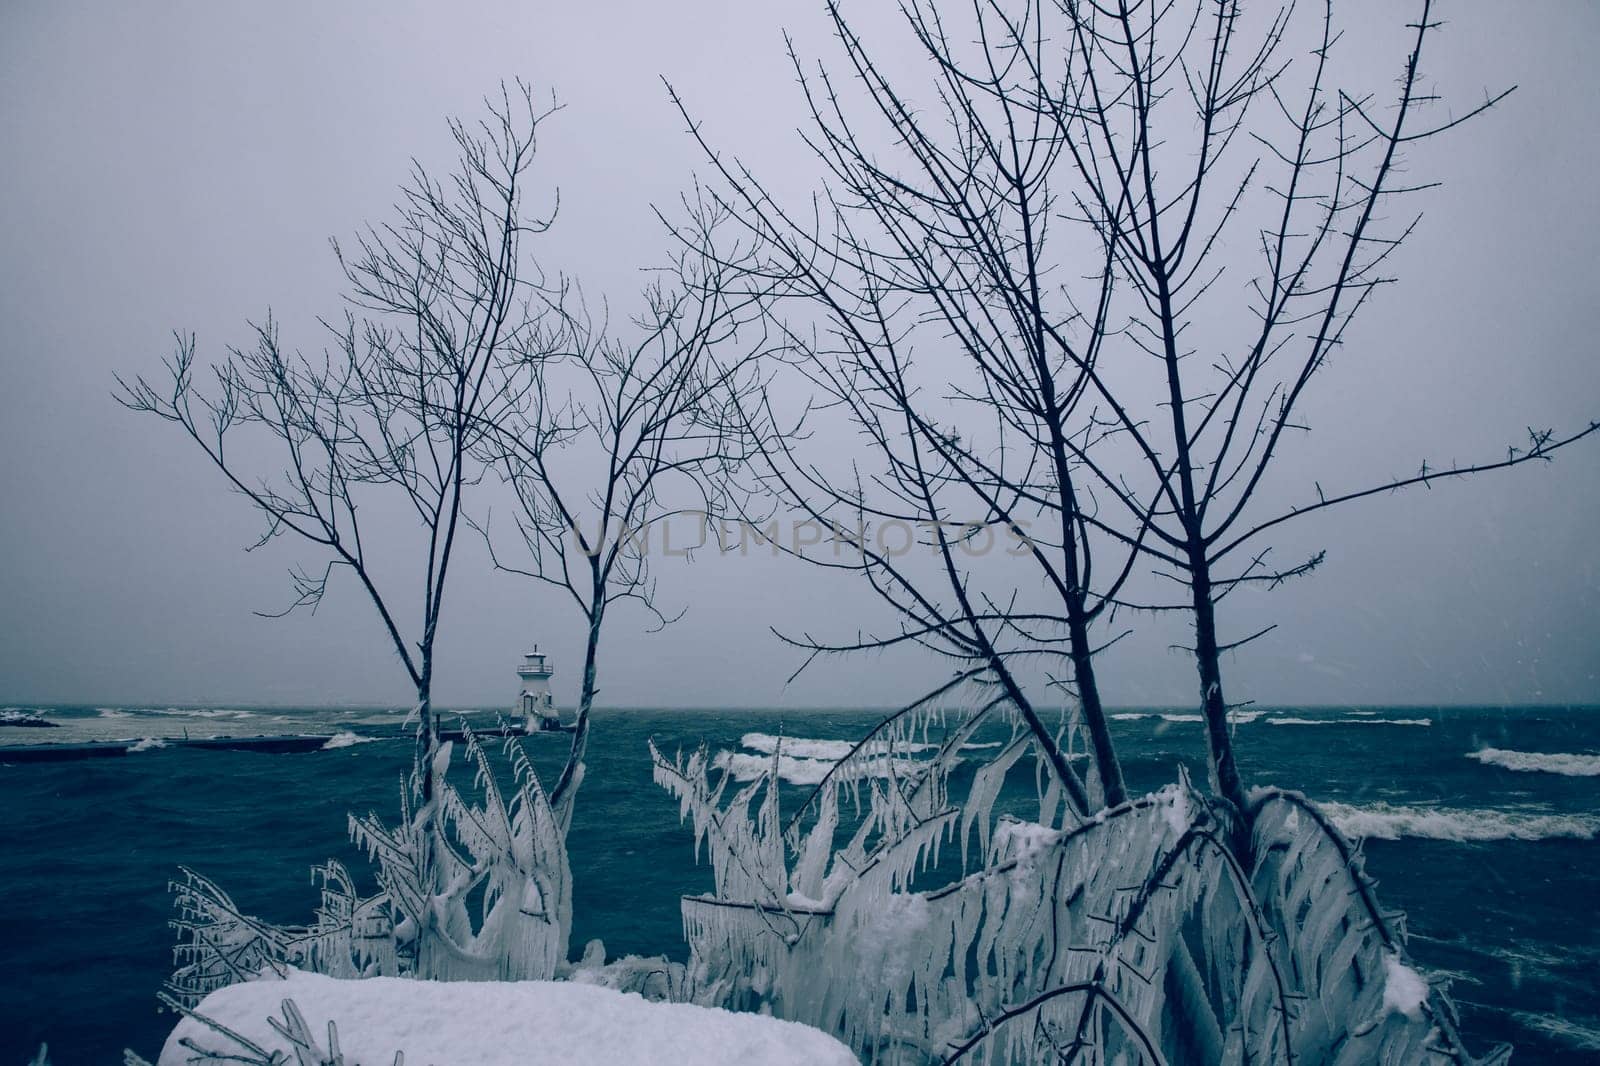 Bare trees covered in snow with a lighthouse and water in the background and an overcast day in the Bruce Peninsula, Ontario, Canada